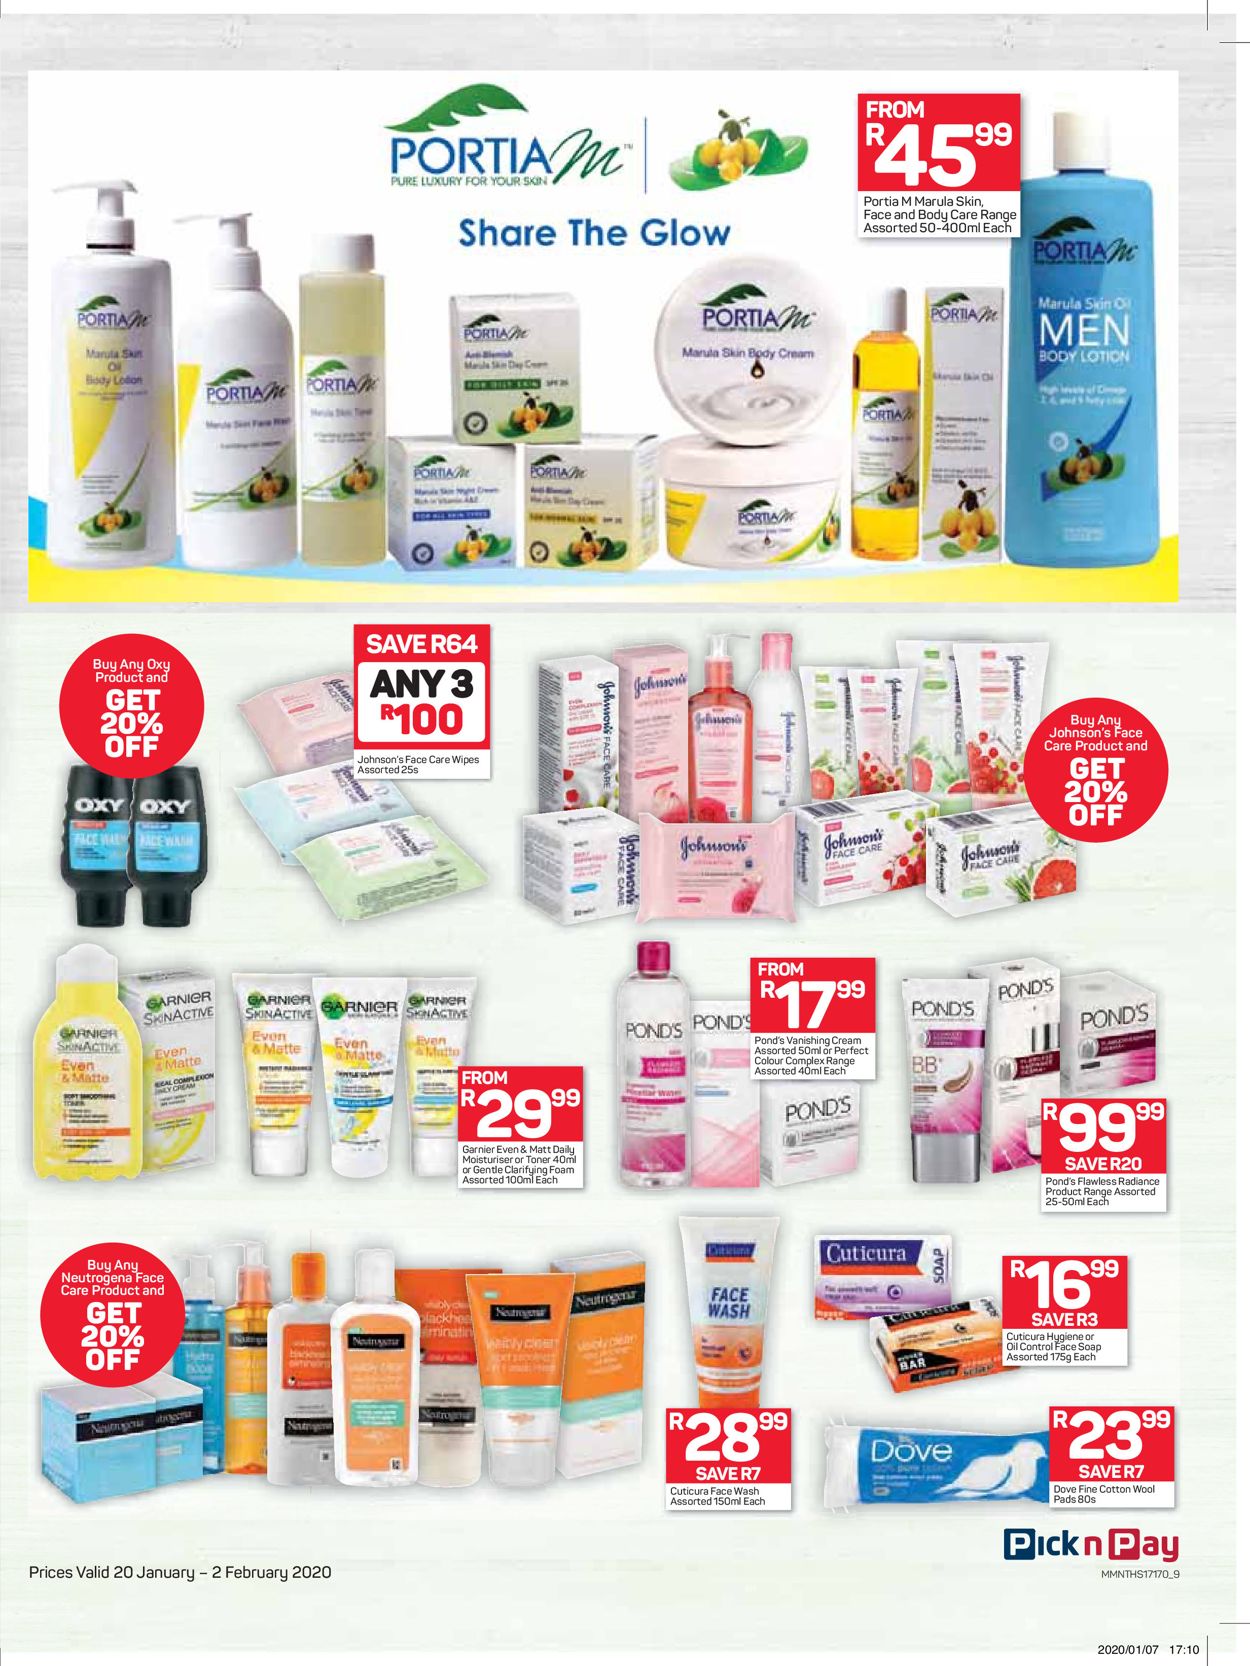 Pick n Pay Catalogue - 2020/01/20-2020/02/02 (Page 10)